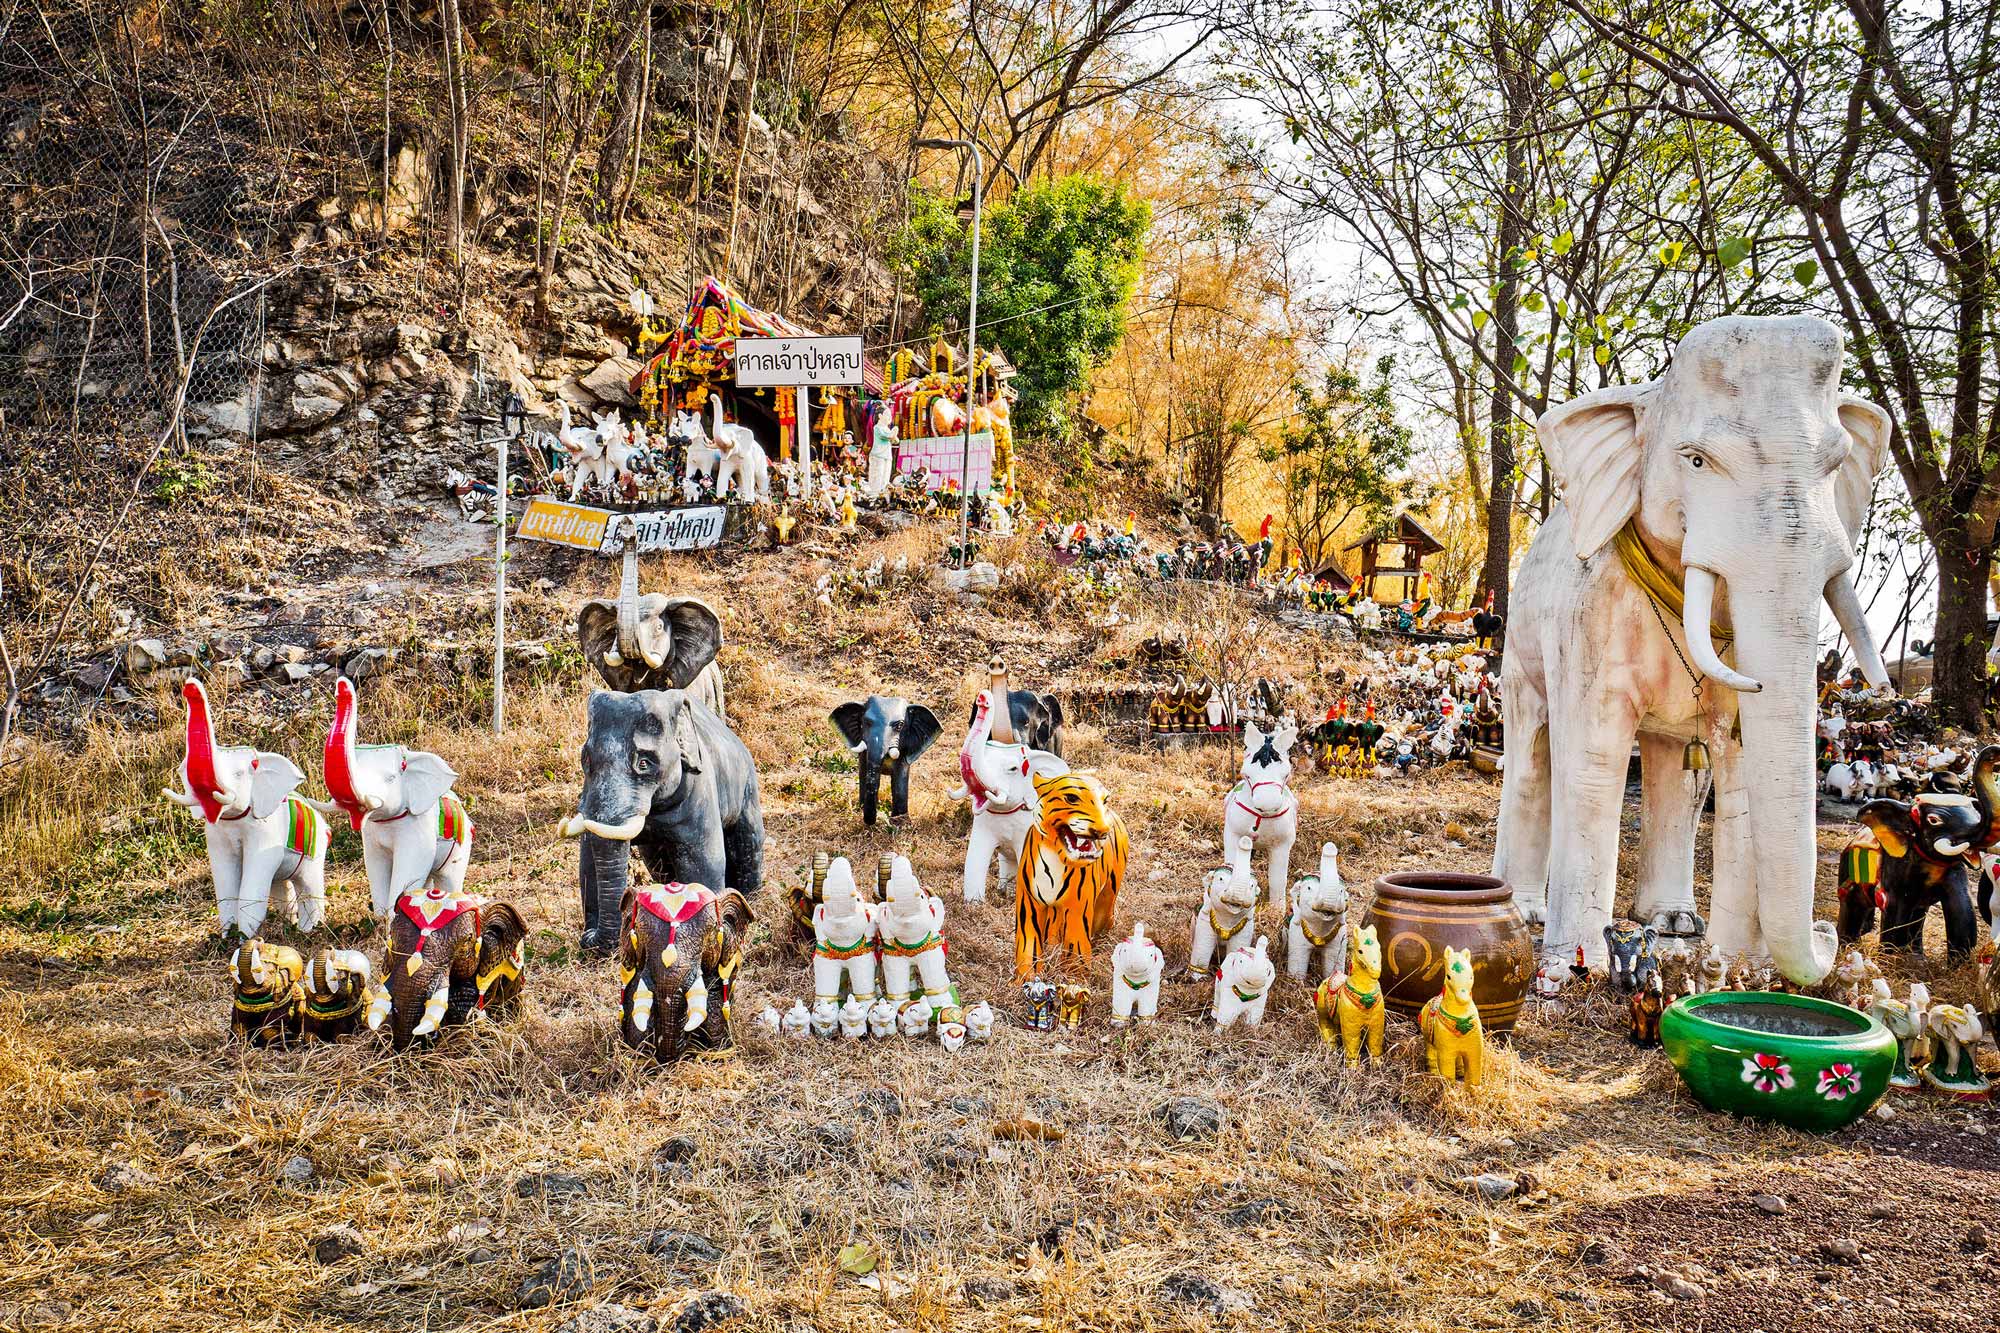 Elephant figures displayed in a forest in Ayutthaya